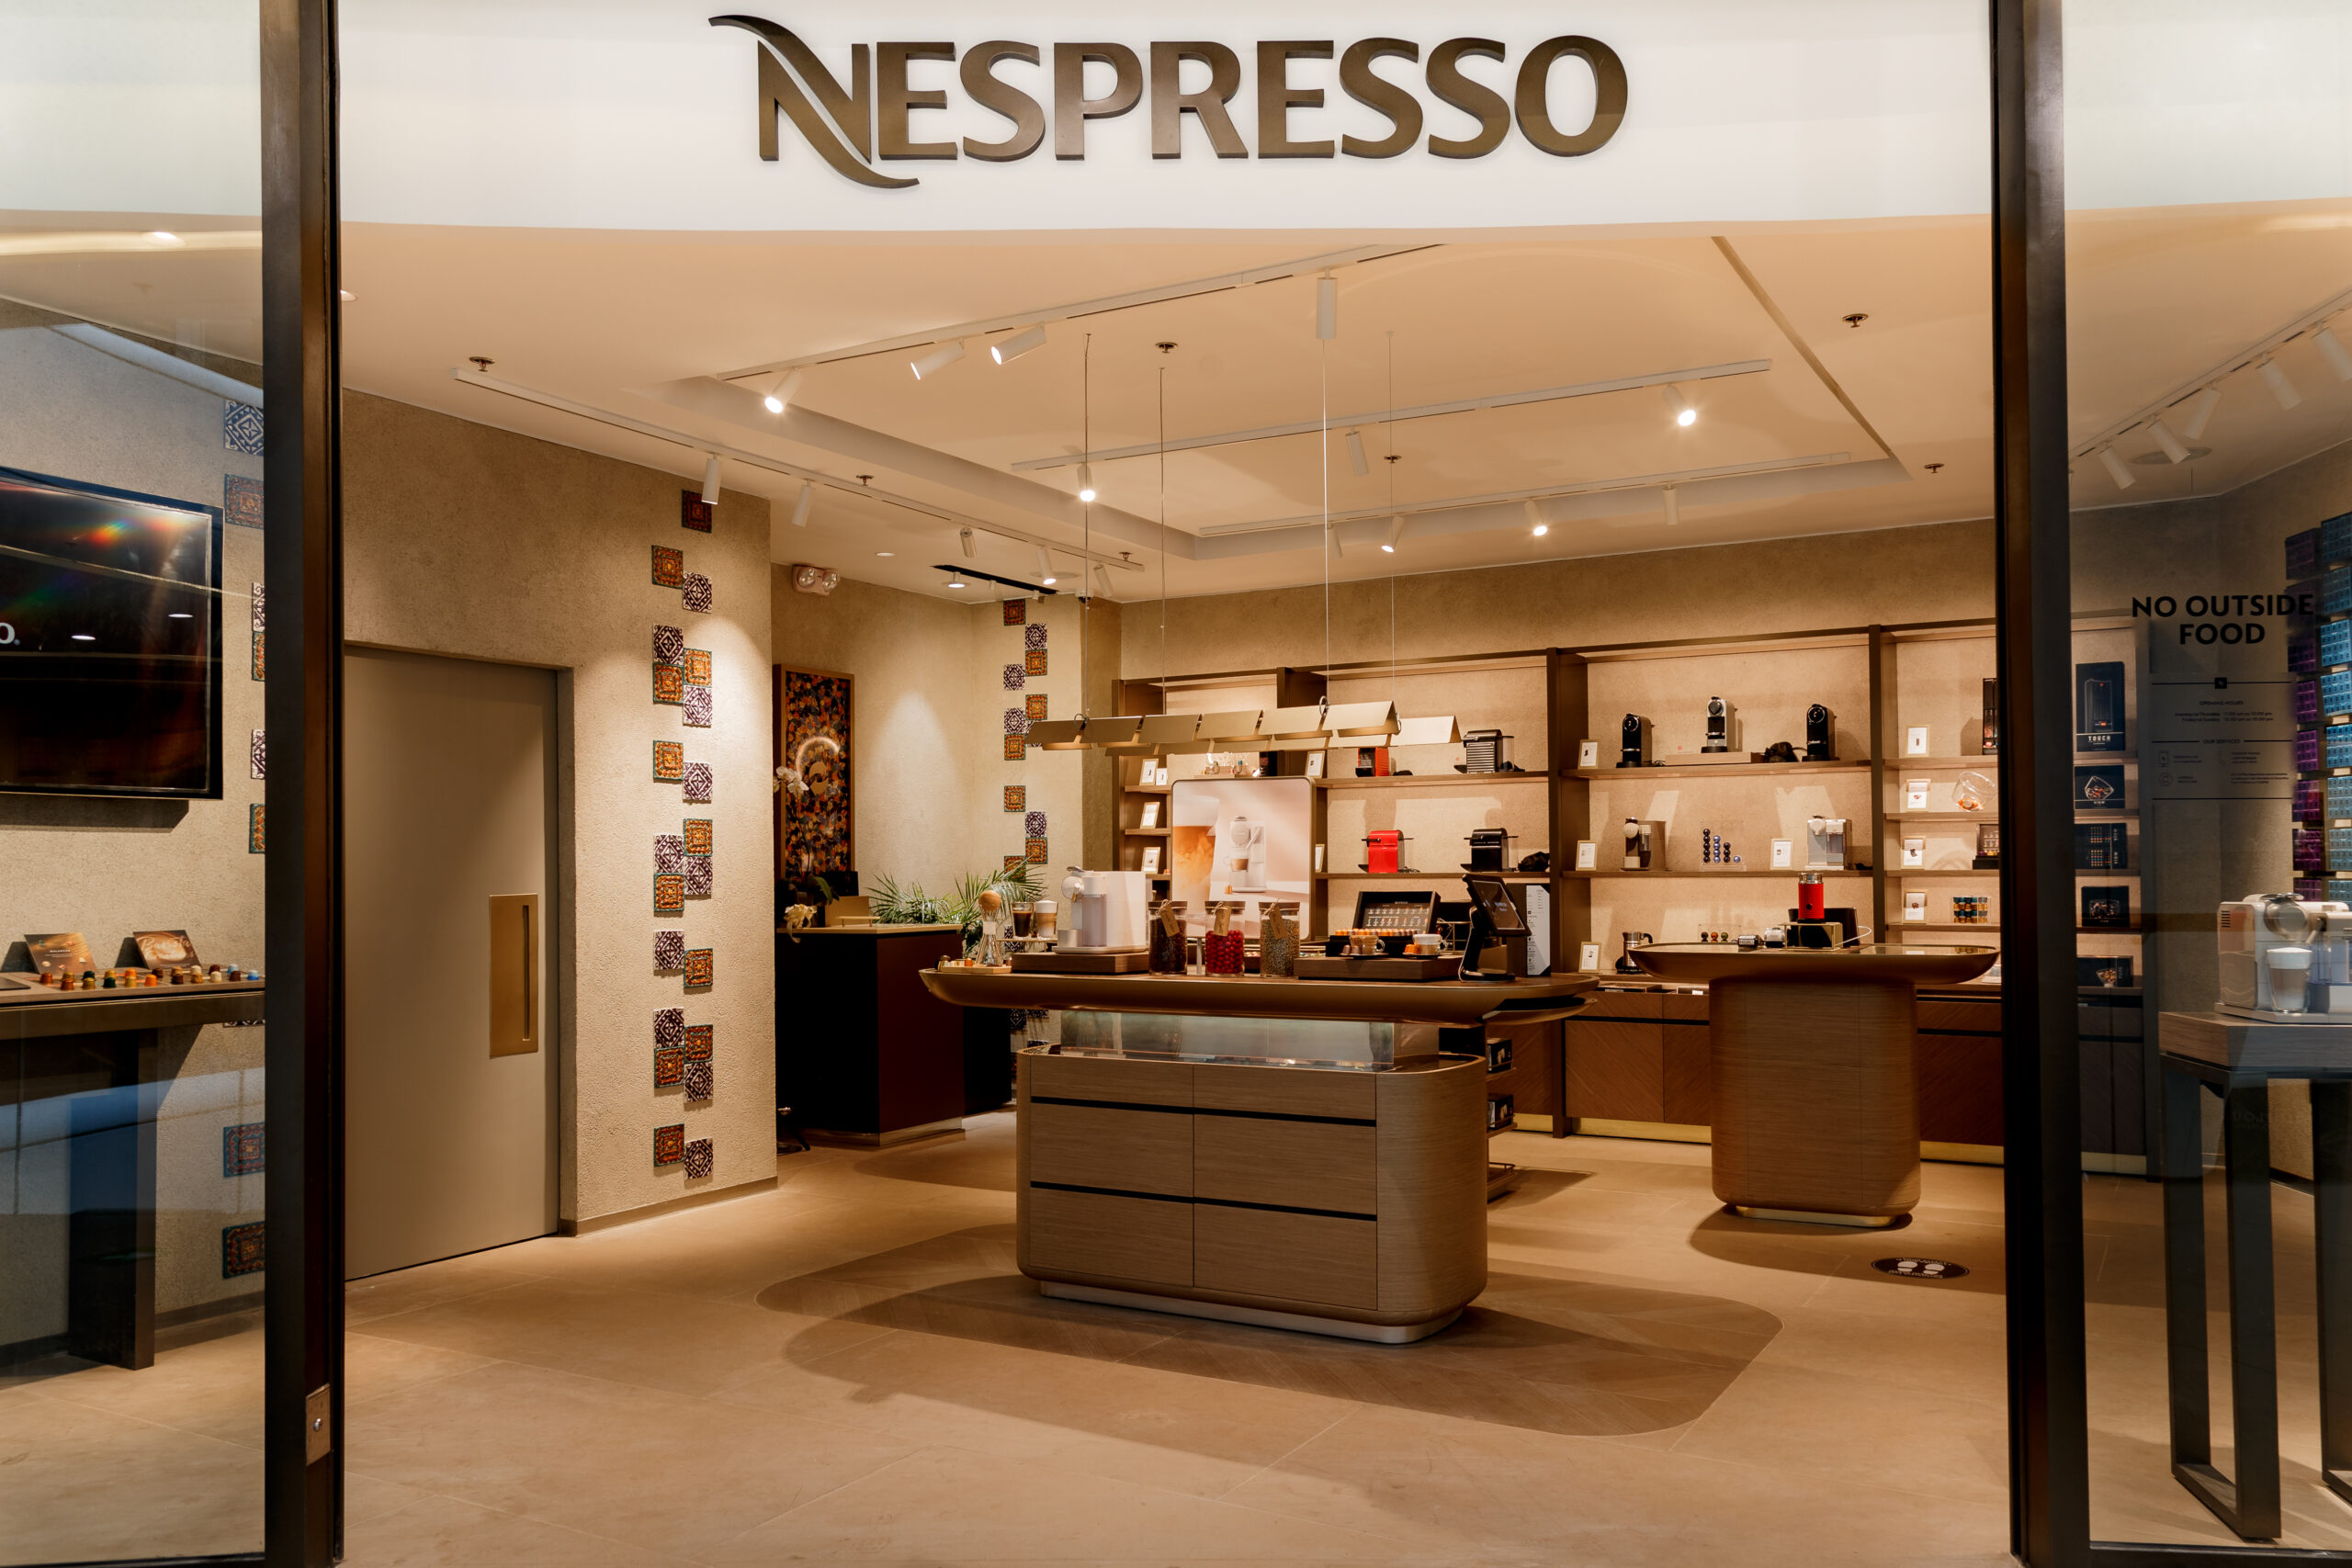 Nespresso opens a new boutique at The Podium